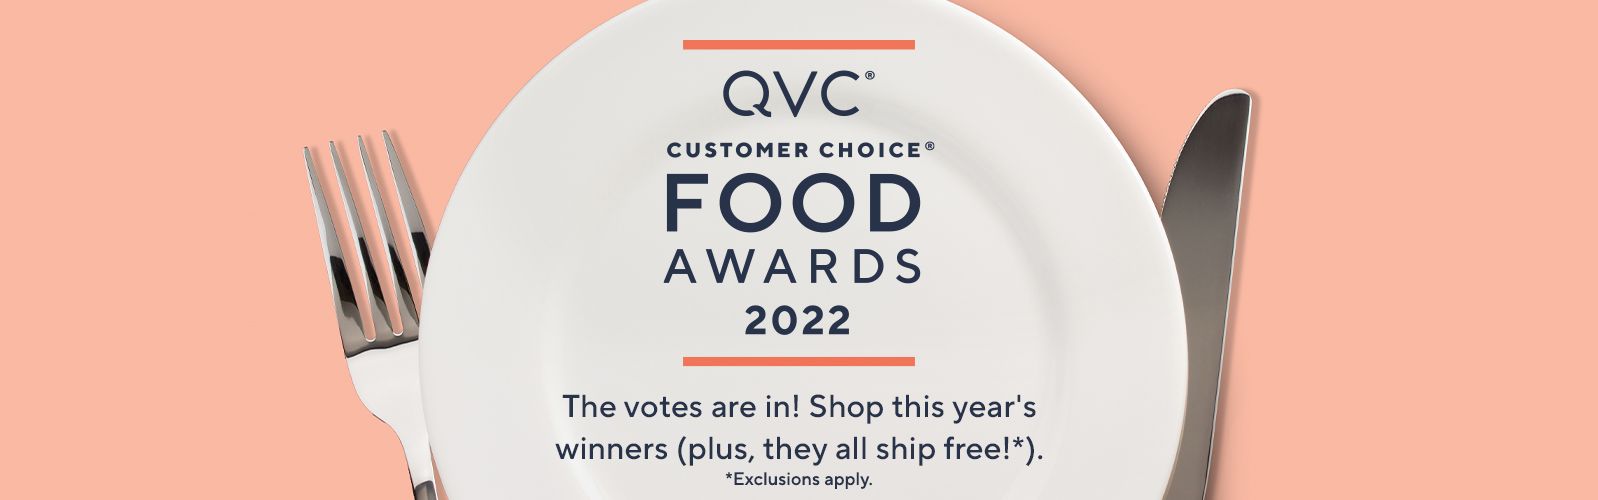 QVC® Customer Choice® Food Awards:  The votes are in! Shop this year's winners (plus, they all ship free!*).  *Exclusions apply. 